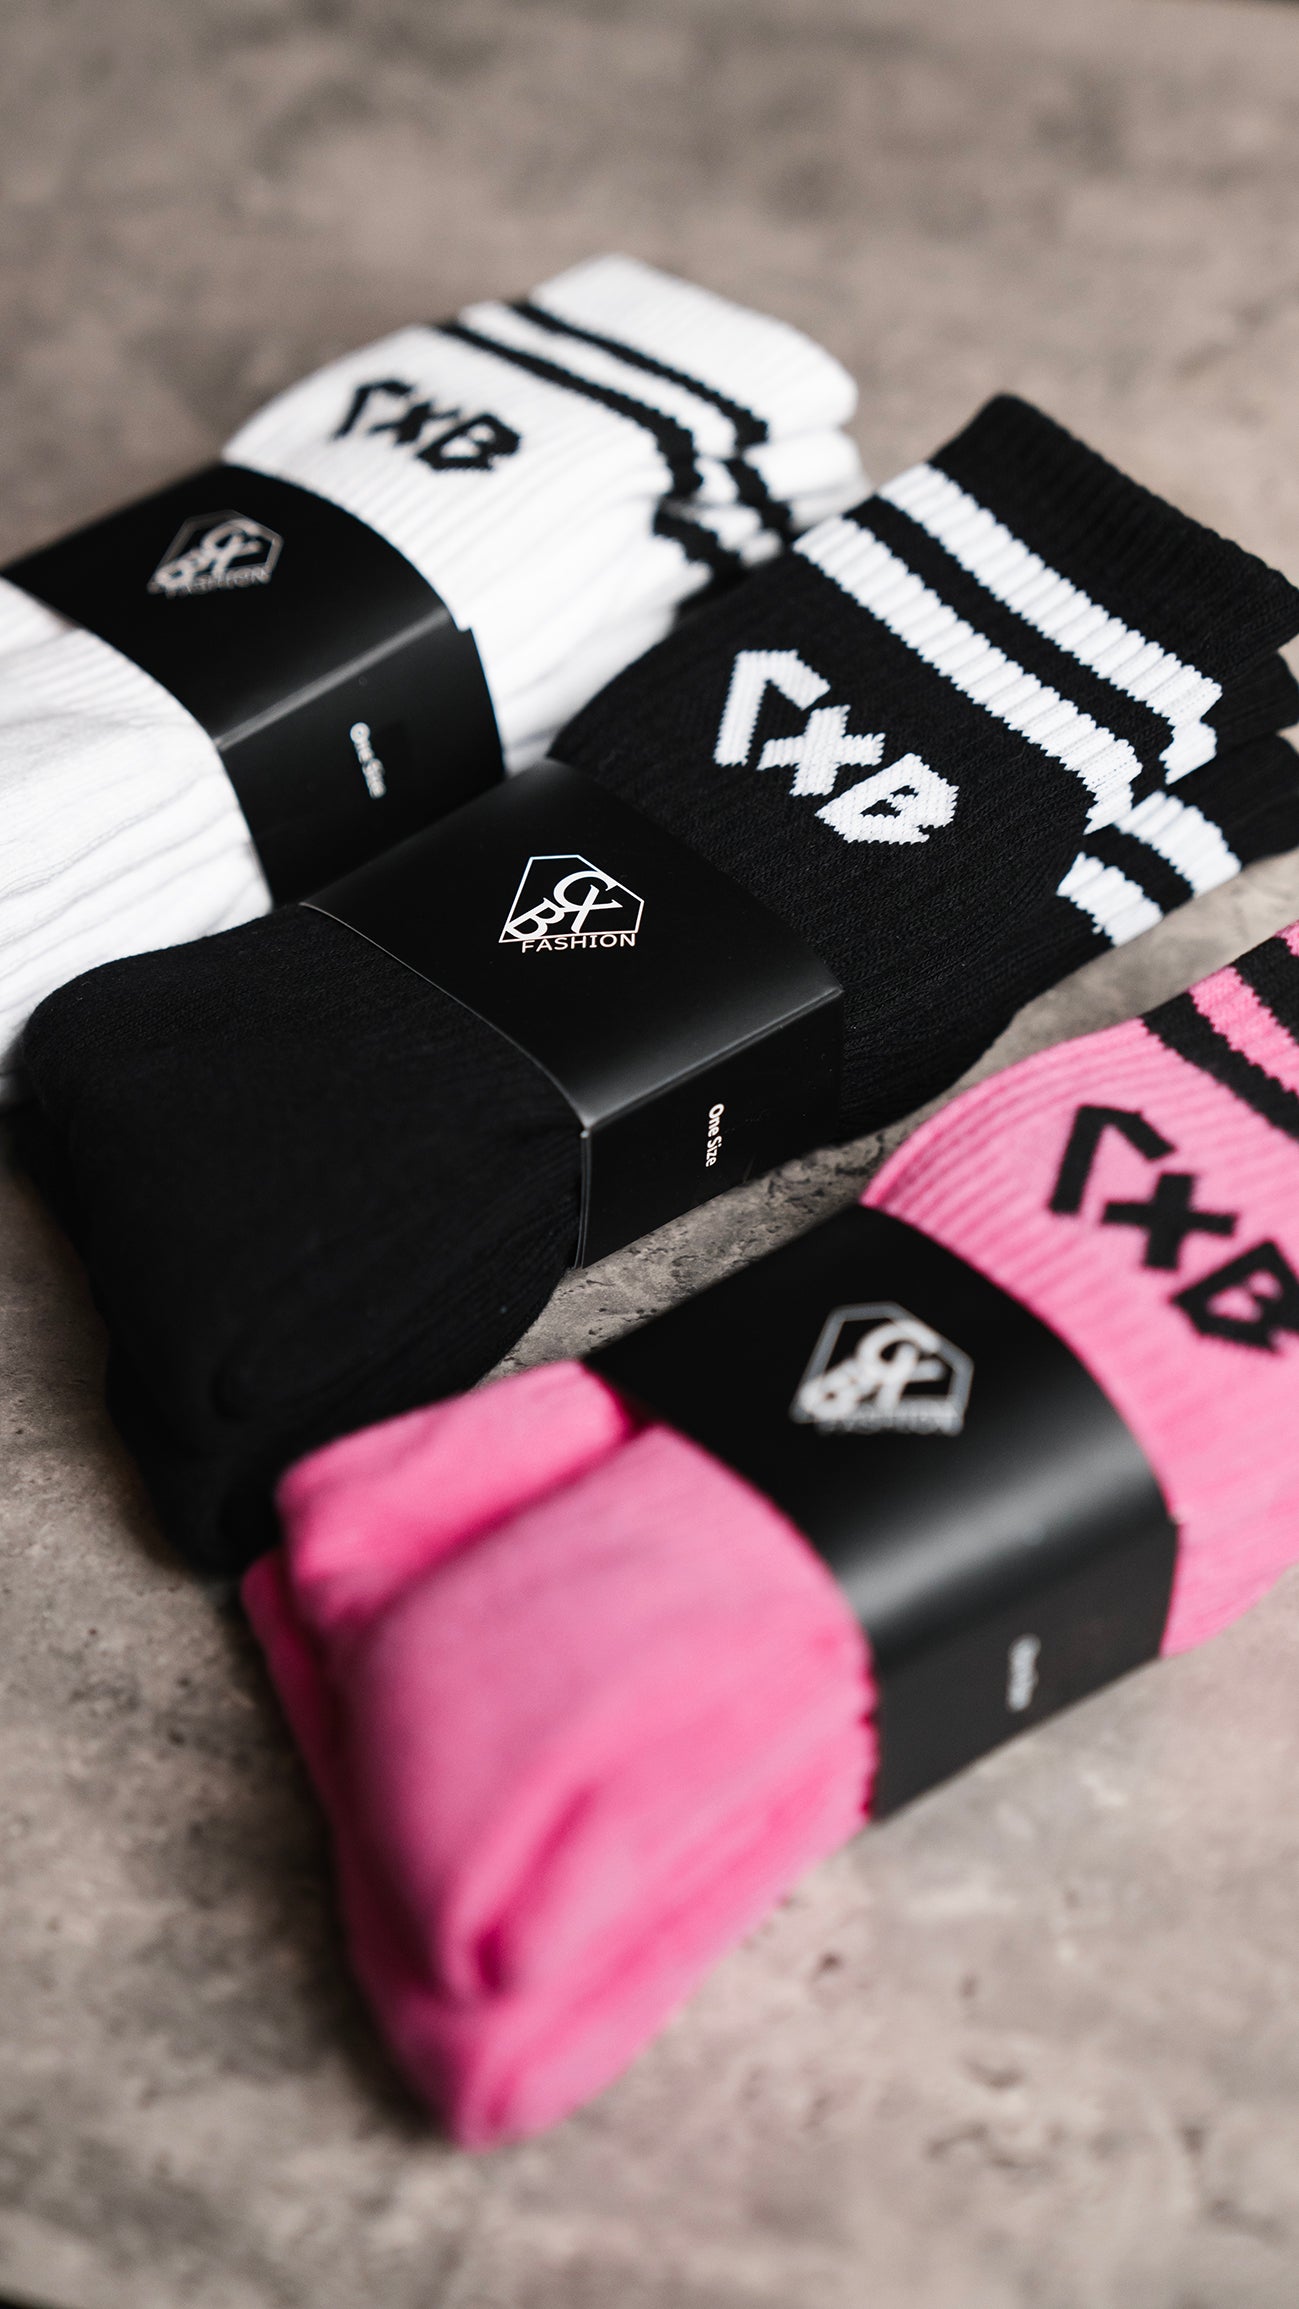 The men's socks - Pink 2 pieces